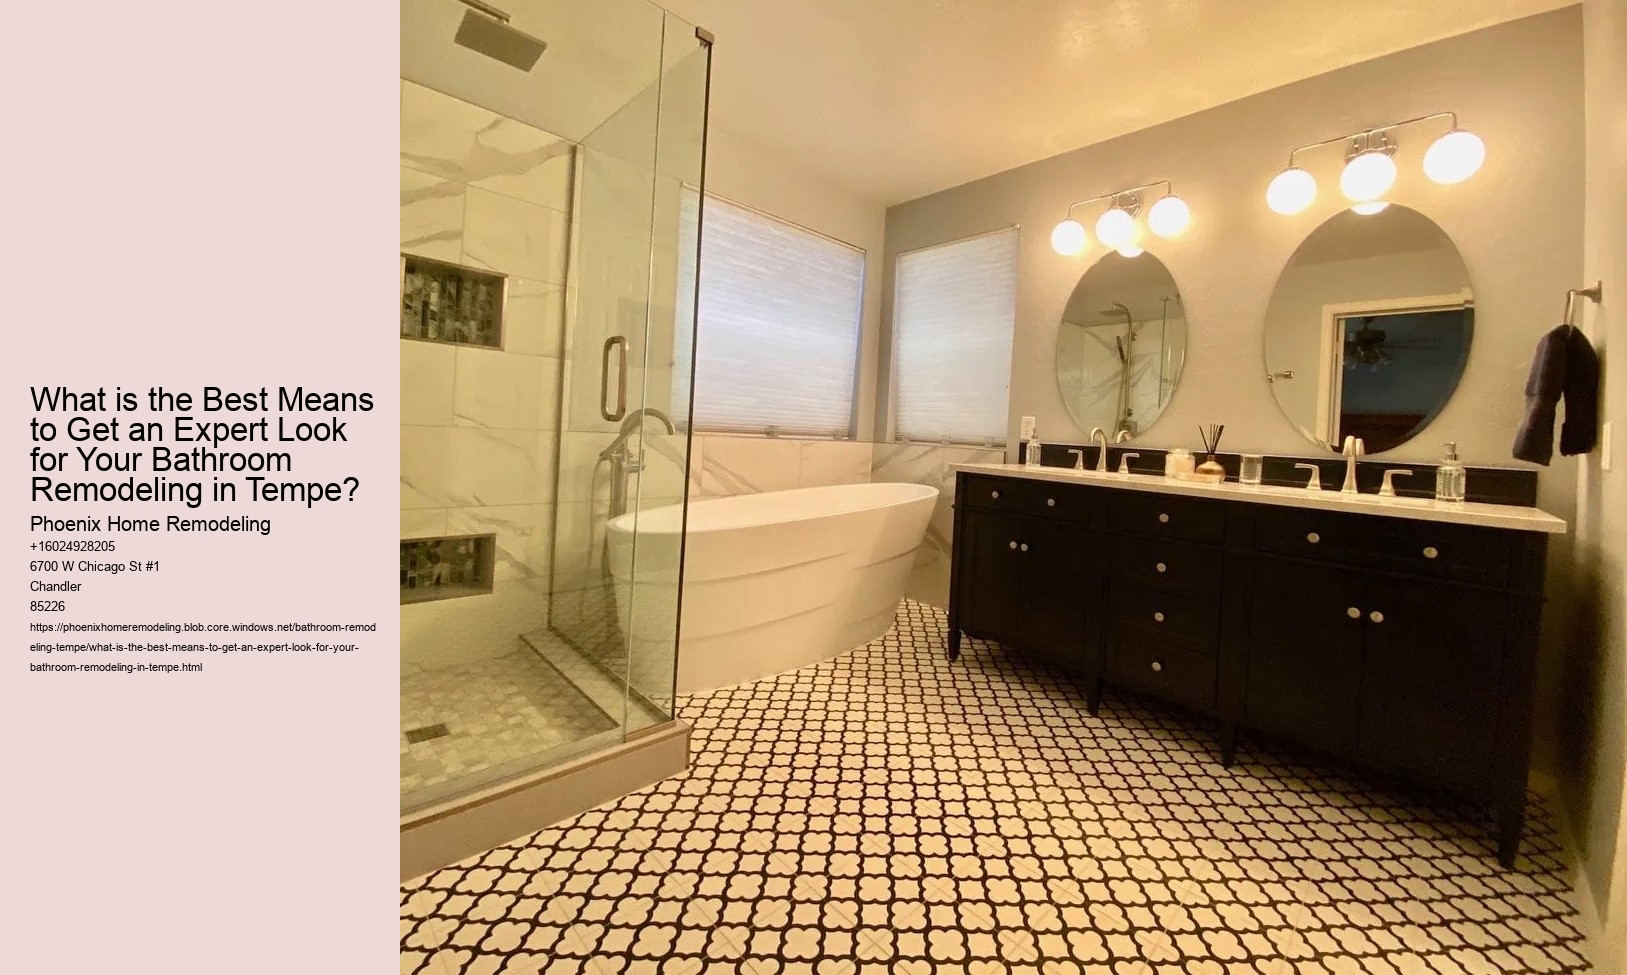 What is the Best Means to Get an Expert Look for Your Bathroom Remodeling in Tempe?